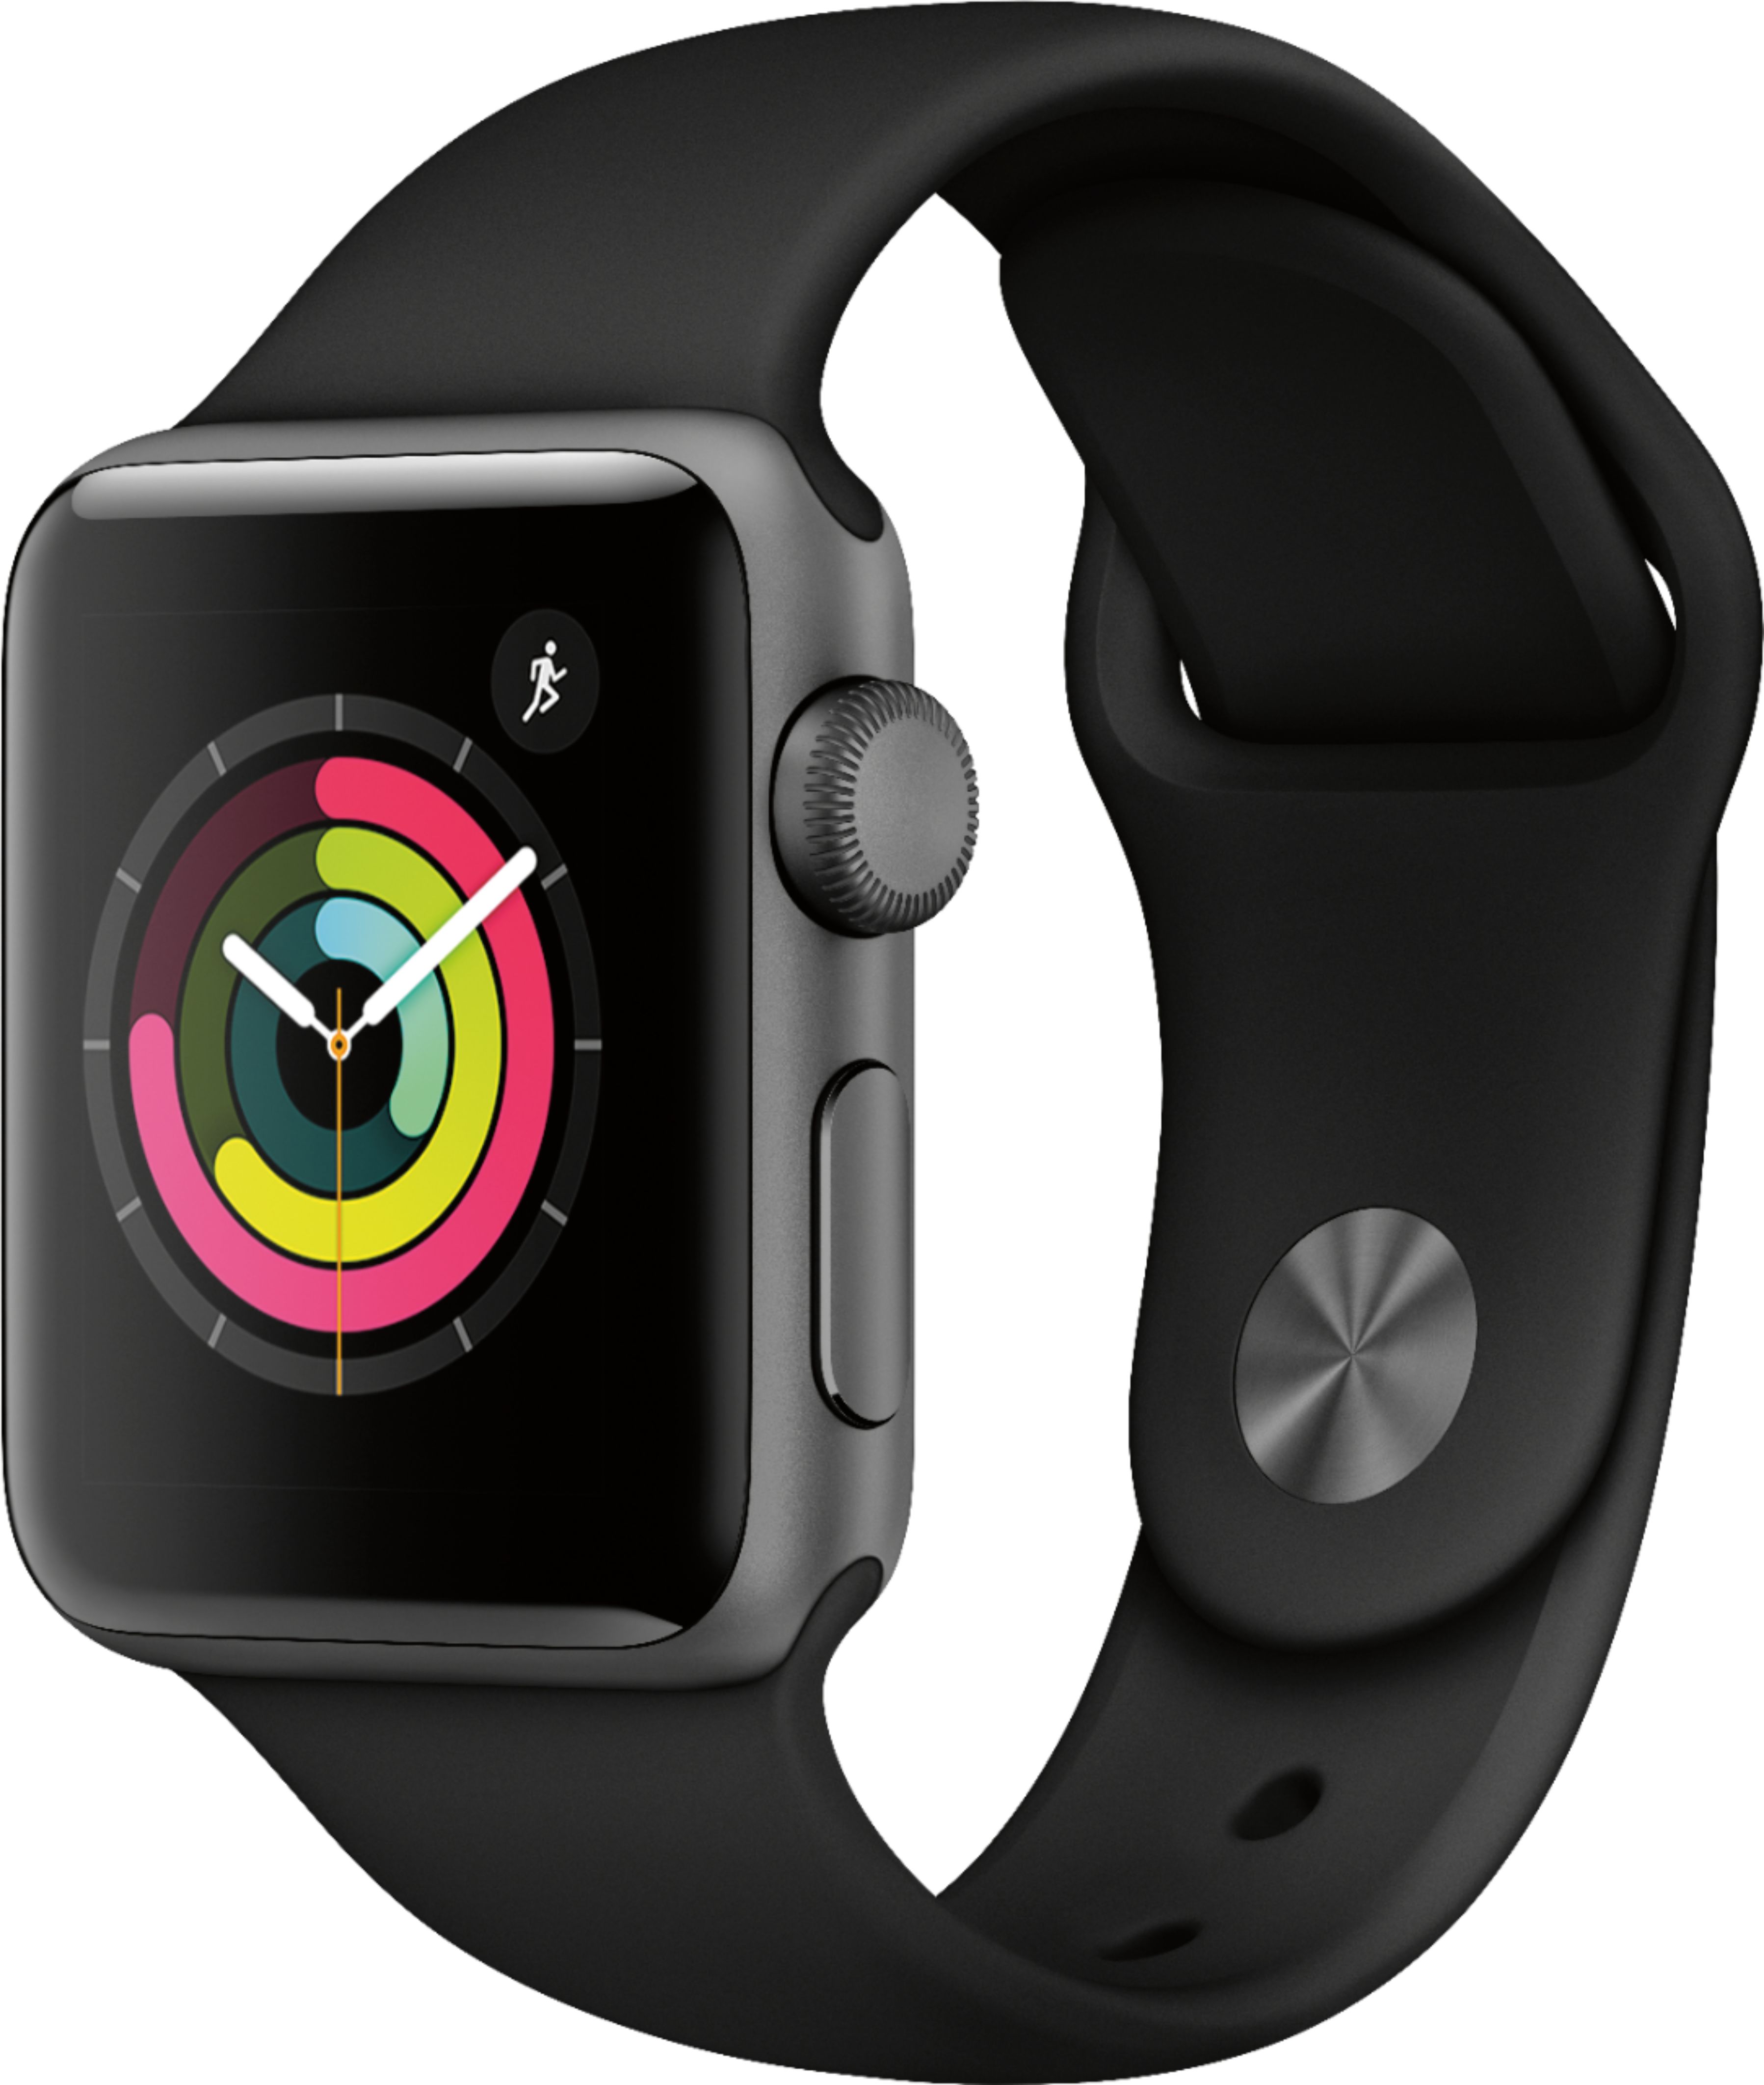 0190198806116 - APPLE WATCH SERIES 3 (GPS, 38MM) - SPACE GRAY ALUMINUM CASE WITH BLACK SPORT BAND